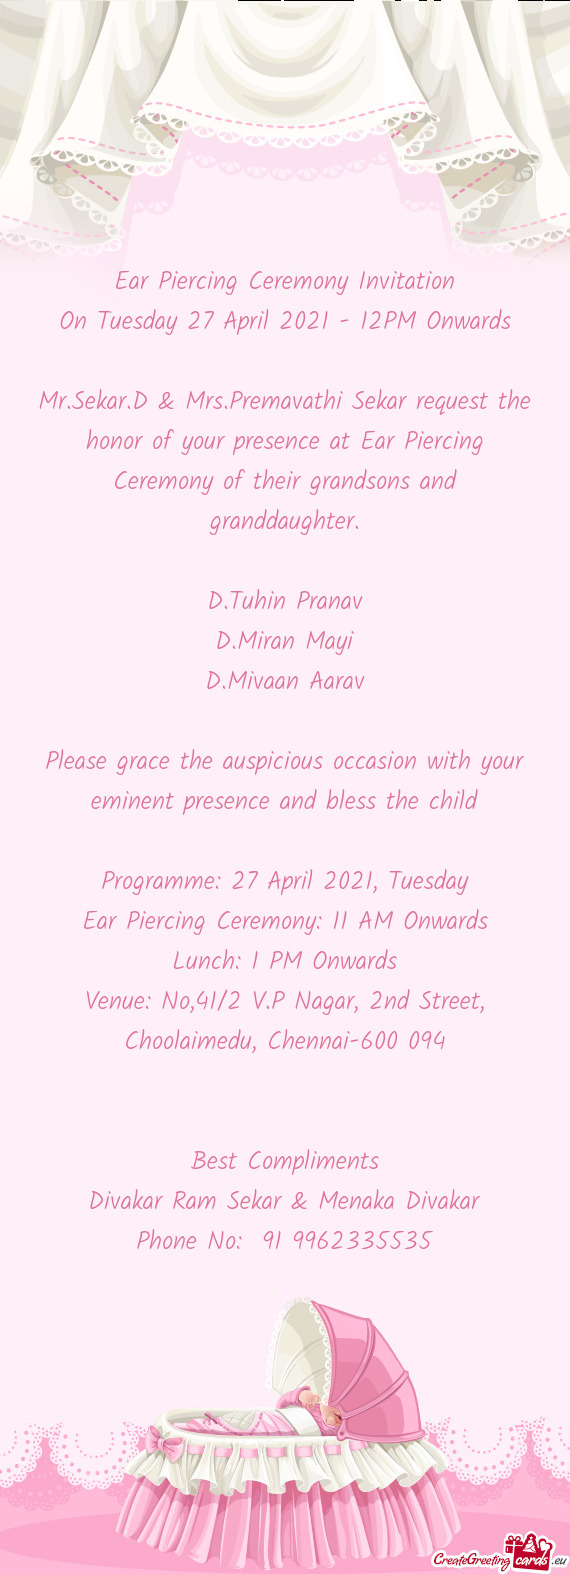 On Tuesday 27 April 2021 - 12PM Onwards